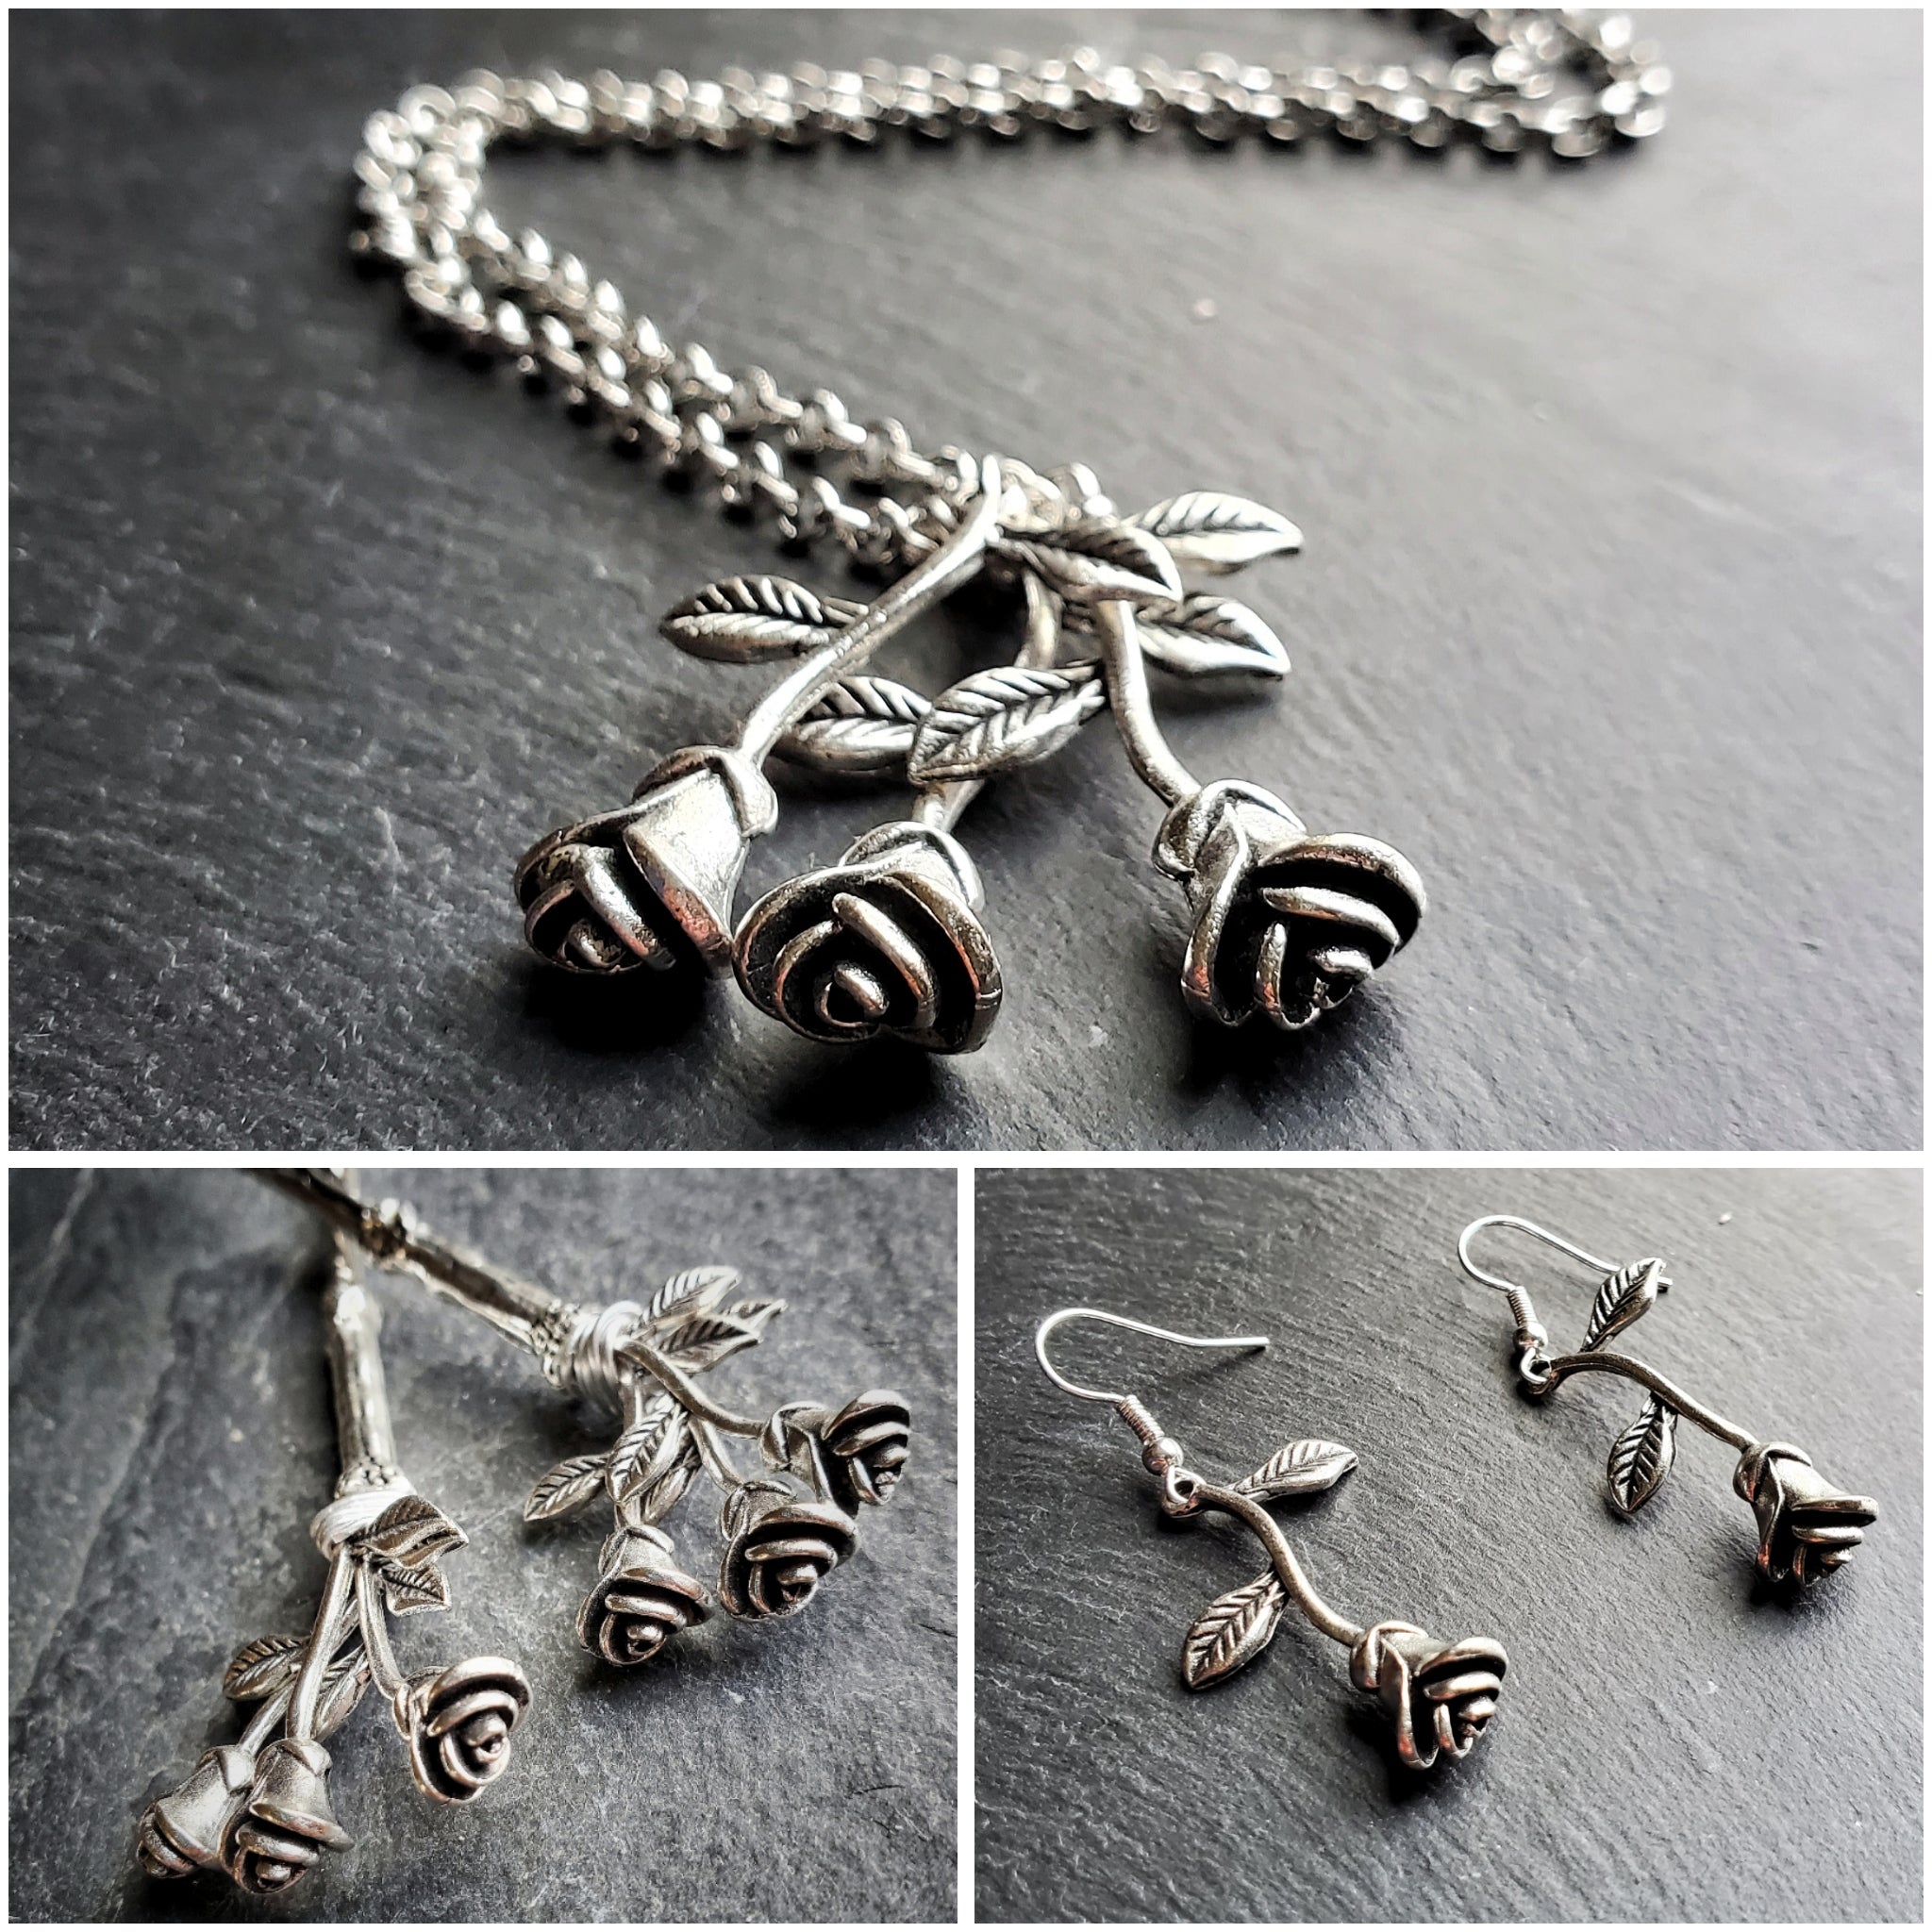 Hanging Roses Jewelry Gift Set Necklace Earrings Hair Sticks